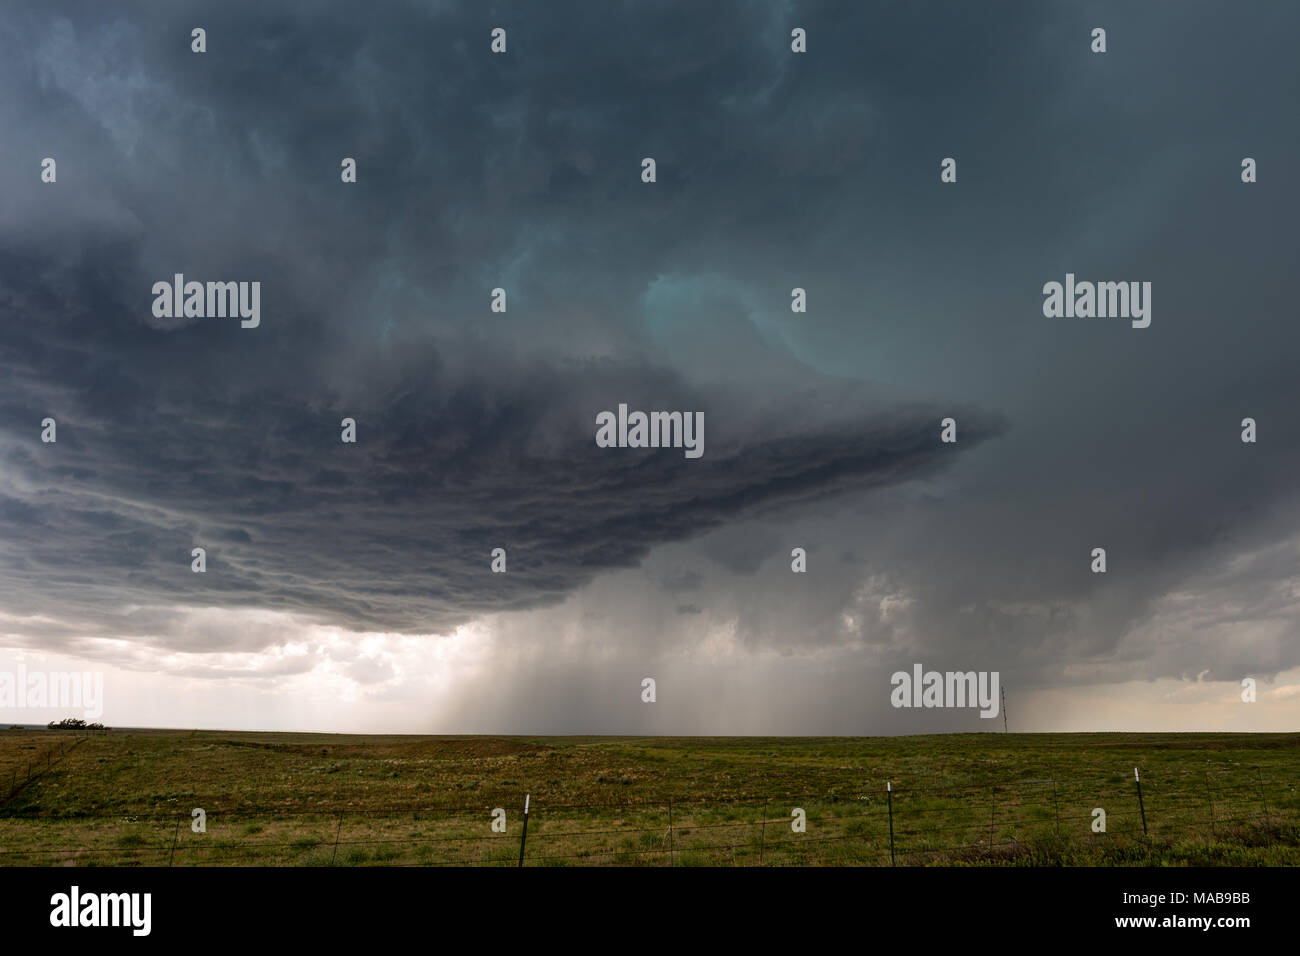 Dark storm clouds from a severe thunderstorm in the plains near Eads, Colorado Stock Photo